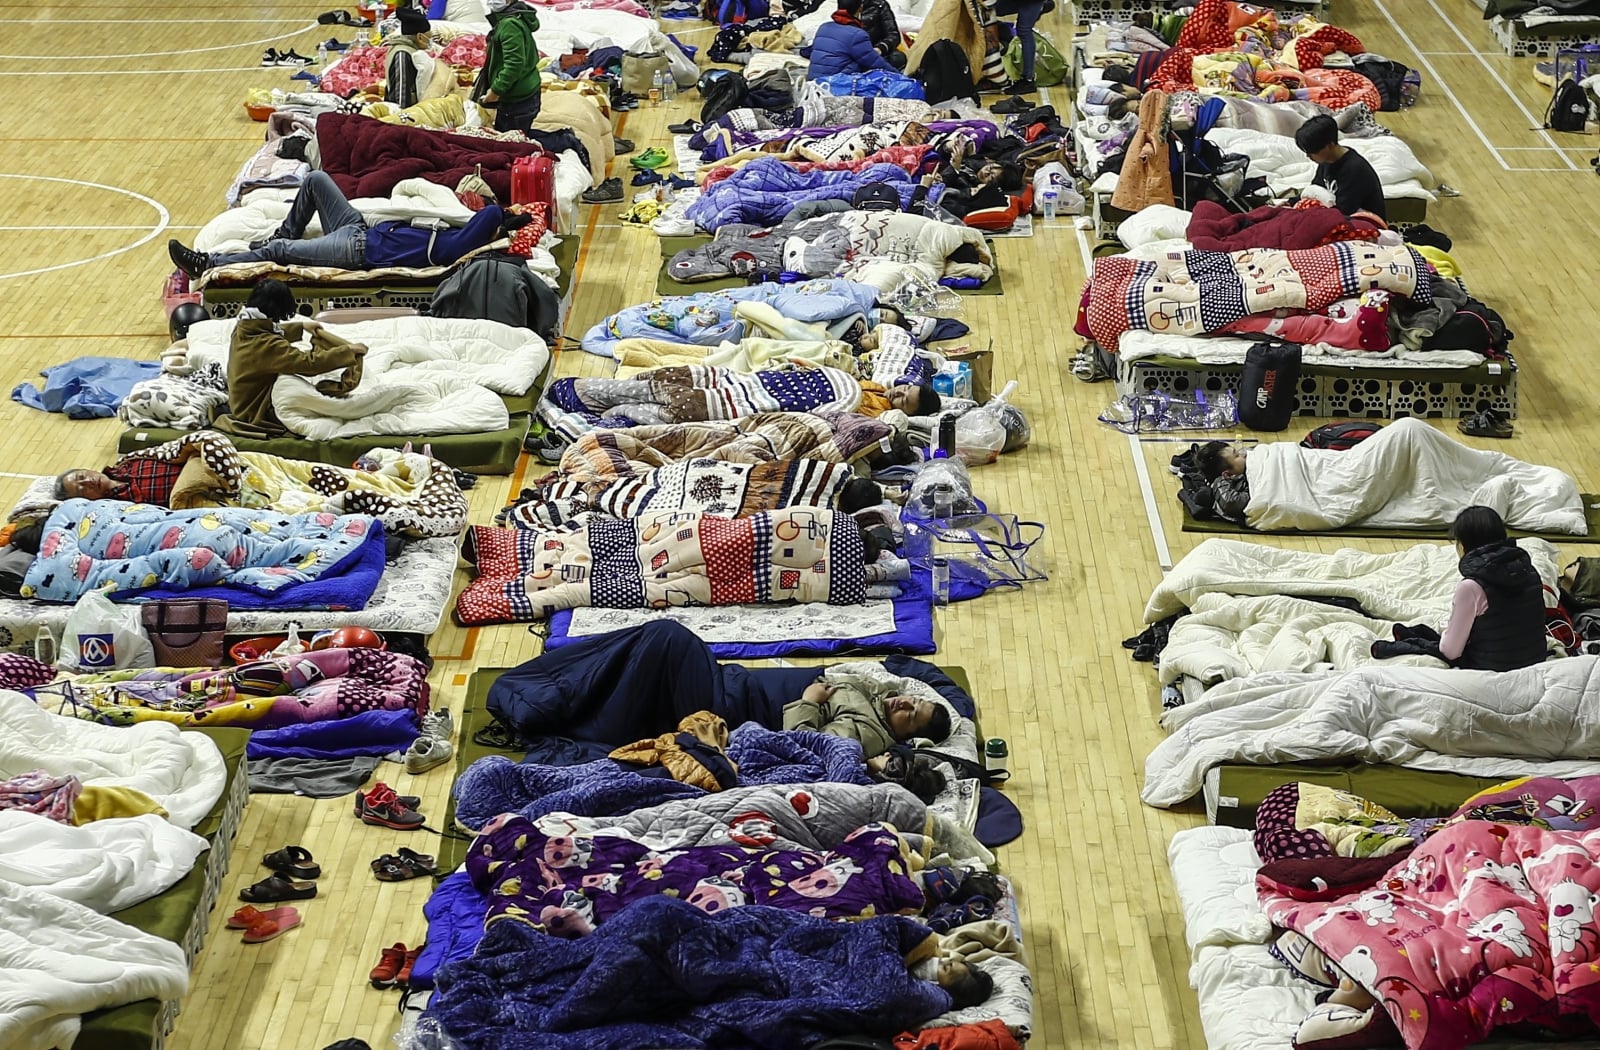 epa06503348 Displaced earthquake affected residents rest inside a gymnasium turned into a temporary shelter in Hualien, Taiwan, 08 February 2018. According to local media reports, at least six people were killed and more than 200 injured in the 6.4 magnitude earthquake on 06 February that severely damaged and partially collapsed at least four buildings. Rescue operations are underway as 76 people are believed to be missing in the rubble. Another 5.7 magnitude earthquake was detected on 07 February 2018 as aftershocks continue to hit Taiwan.  EPA/RITCHIE B. TONGO 
Dostawca: PAP/EPA.